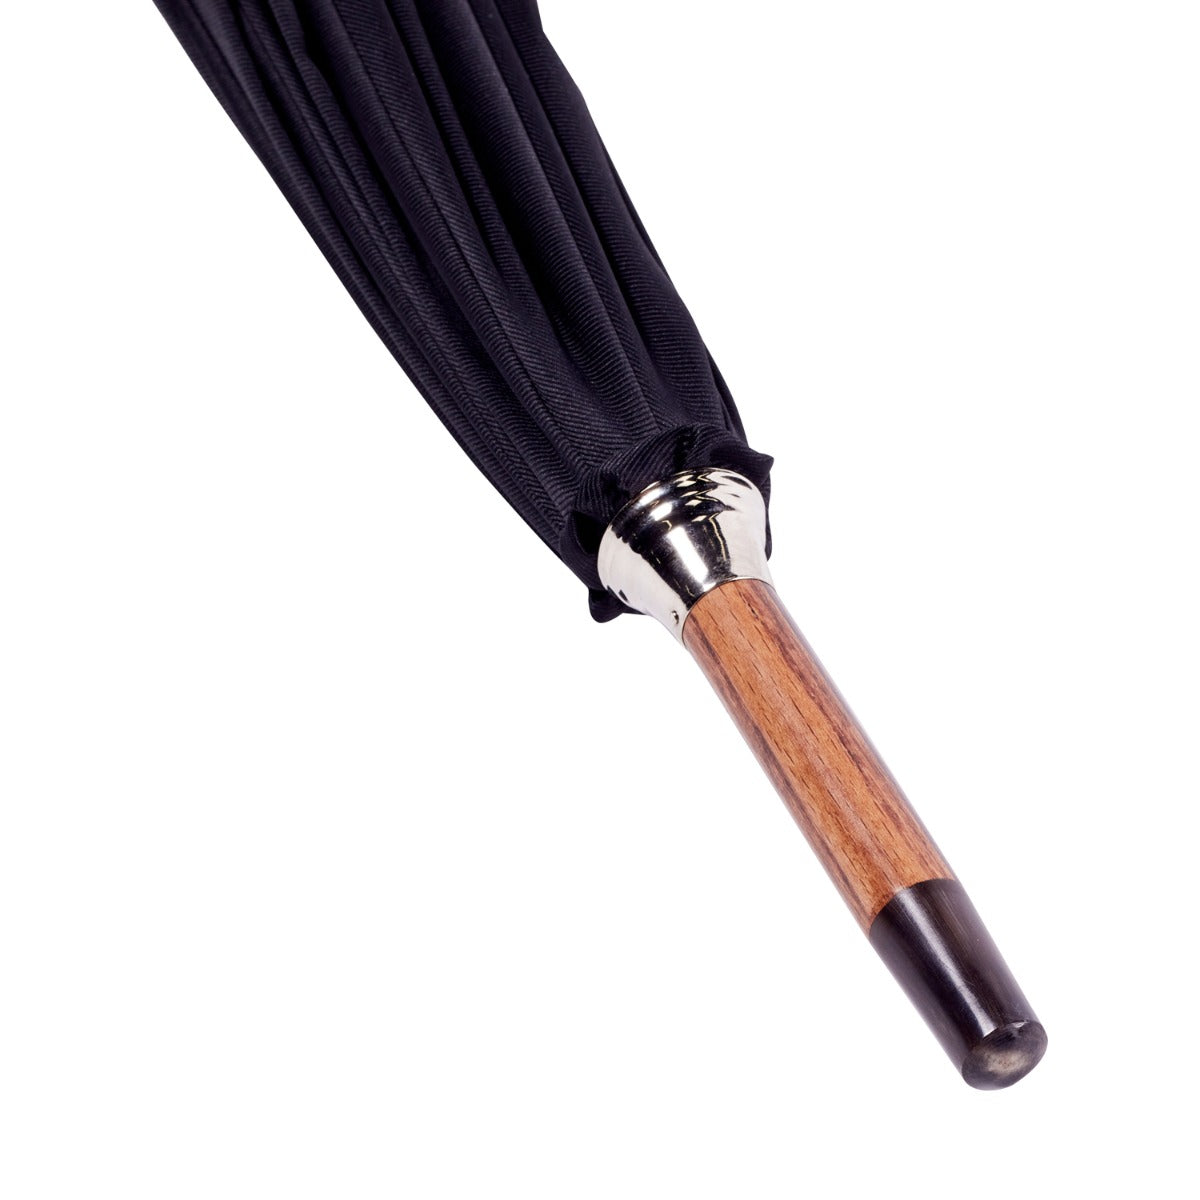 A handcrafted Black Pigskin Solid Stick Umbrella with Black Canopy from KirbyAllison.com with a wooden handle.